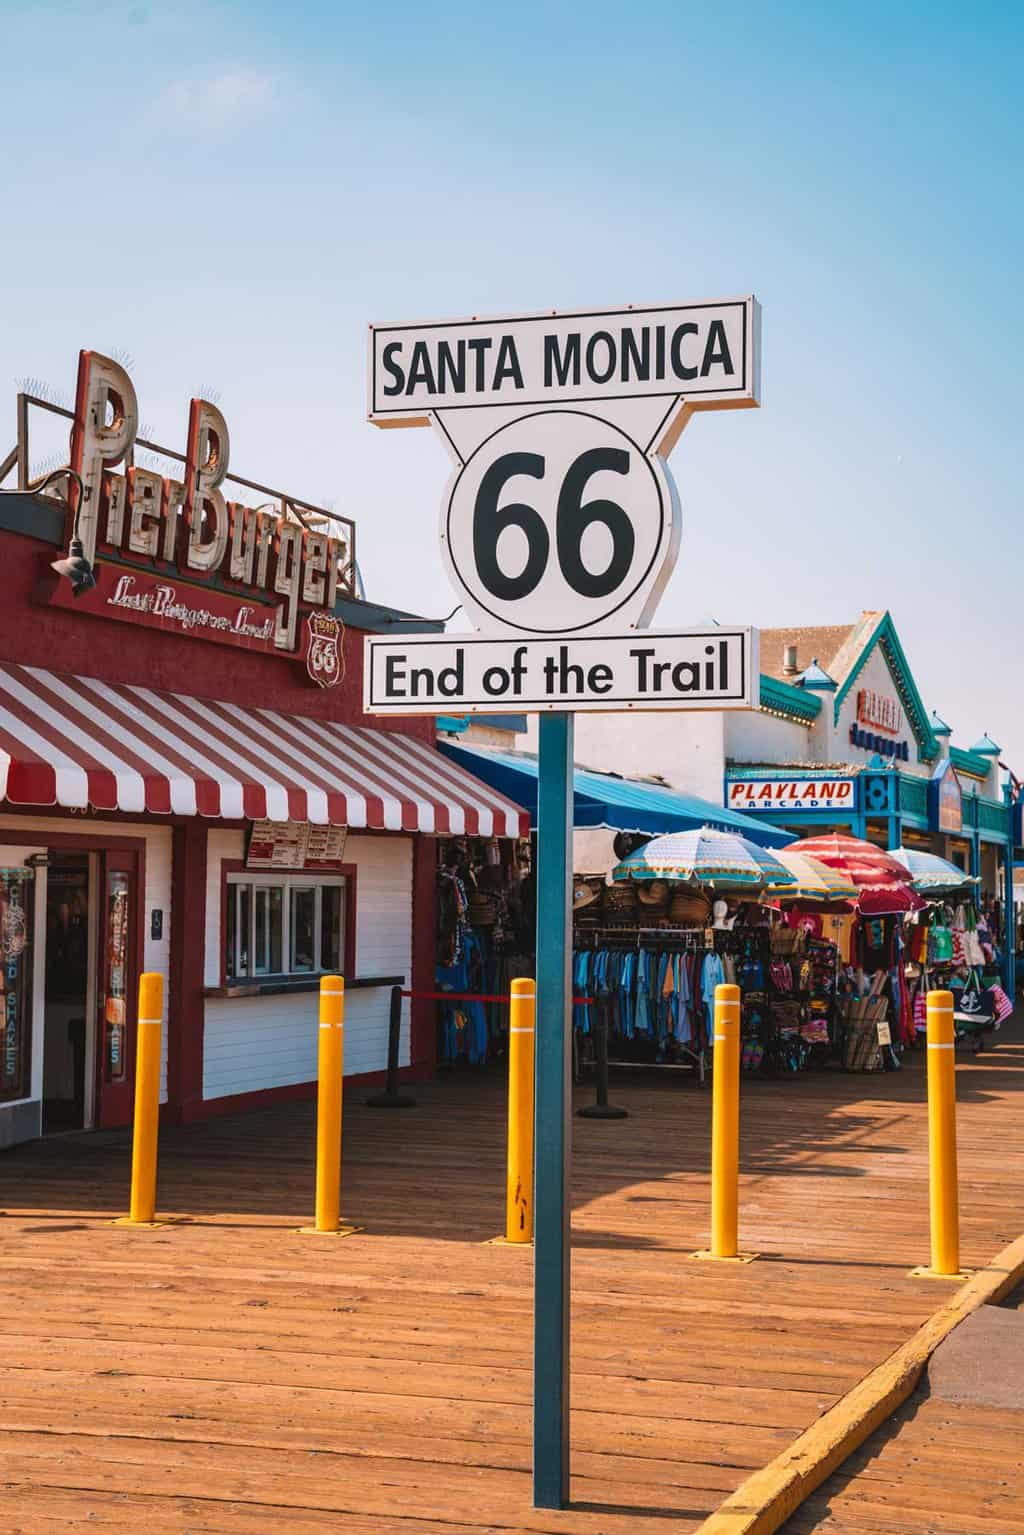 Santa Monica Route 66 End of the Trail sign on a boardwalk in front of colourful shops and restaurants. 